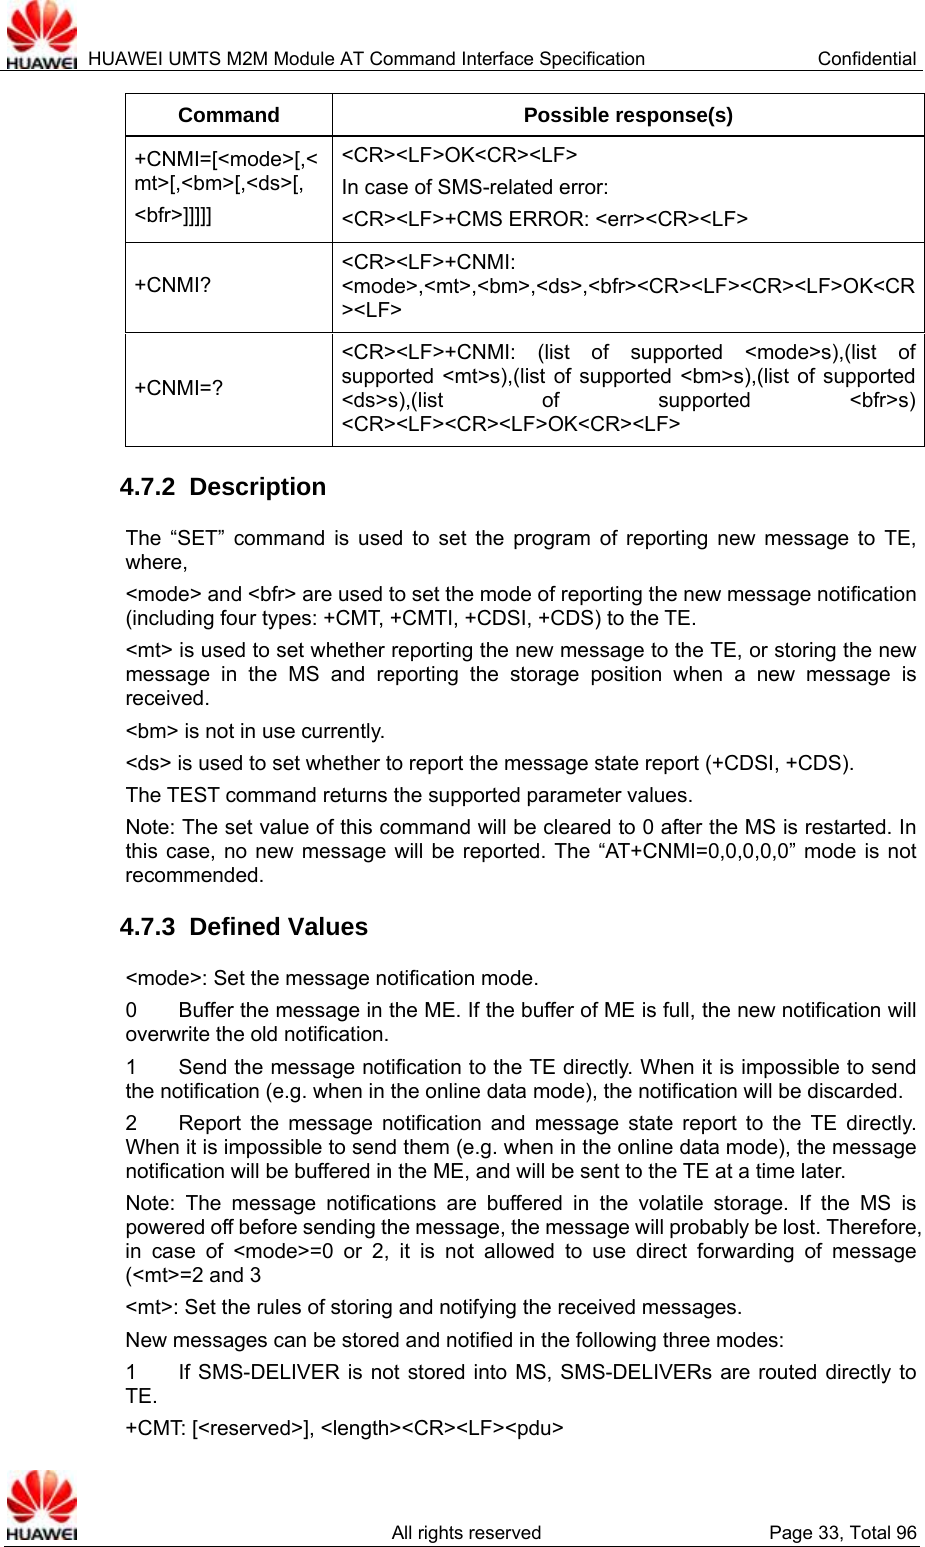  HUAWEI UMTS M2M Module AT Command Interface Specification  Confidential   All rights reserved  Page 33, Total 96 Command Possible response(s) +CNMI=[&lt;mode&gt;[,&lt;mt&gt;[,&lt;bm&gt;[,&lt;ds&gt;[, &lt;bfr&gt;]]]]] &lt;CR&gt;&lt;LF&gt;OK&lt;CR&gt;&lt;LF&gt; In case of SMS-related error:   &lt;CR&gt;&lt;LF&gt;+CMS ERROR: &lt;err&gt;&lt;CR&gt;&lt;LF&gt; +CNMI? &lt;CR&gt;&lt;LF&gt;+CNMI: &lt;mode&gt;,&lt;mt&gt;,&lt;bm&gt;,&lt;ds&gt;,&lt;bfr&gt;&lt;CR&gt;&lt;LF&gt;&lt;CR&gt;&lt;LF&gt;OK&lt;CR&gt;&lt;LF&gt; +CNMI=? &lt;CR&gt;&lt;LF&gt;+CNMI: (list of supported &lt;mode&gt;s),(list of supported &lt;mt&gt;s),(list of supported &lt;bm&gt;s),(list of supported &lt;ds&gt;s),(list of supported &lt;bfr&gt;s) &lt;CR&gt;&lt;LF&gt;&lt;CR&gt;&lt;LF&gt;OK&lt;CR&gt;&lt;LF&gt; 4.7.2  Description The “SET” command is used to set the program of reporting new message to TE, where,   &lt;mode&gt; and &lt;bfr&gt; are used to set the mode of reporting the new message notification (including four types: +CMT, +CMTI, +CDSI, +CDS) to the TE. &lt;mt&gt; is used to set whether reporting the new message to the TE, or storing the new message in the MS and reporting the storage position when a new message is received.  &lt;bm&gt; is not in use currently.   &lt;ds&gt; is used to set whether to report the message state report (+CDSI, +CDS).   The TEST command returns the supported parameter values.   Note: The set value of this command will be cleared to 0 after the MS is restarted. In this case, no new message will be reported. The “AT+CNMI=0,0,0,0,0” mode is not recommended.   4.7.3  Defined Values &lt;mode&gt;: Set the message notification mode. 0        Buffer the message in the ME. If the buffer of ME is full, the new notification will overwrite the old notification.   1        Send the message notification to the TE directly. When it is impossible to send the notification (e.g. when in the online data mode), the notification will be discarded.   2    Report the message notification and message state report to the TE directly. When it is impossible to send them (e.g. when in the online data mode), the message notification will be buffered in the ME, and will be sent to the TE at a time later.   Note: The message notifications are buffered in the volatile storage. If the MS is powered off before sending the message, the message will probably be lost. Therefore, in case of &lt;mode&gt;=0 or 2, it is not allowed to use direct forwarding of message (&lt;mt&gt;=2 and 3 &lt;mt&gt;: Set the rules of storing and notifying the received messages.   New messages can be stored and notified in the following three modes:   1    If SMS-DELIVER is not stored into MS, SMS-DELIVERs are routed directly to TE. +CMT: [&lt;reserved&gt;], &lt;length&gt;&lt;CR&gt;&lt;LF&gt;&lt;pdu&gt; 